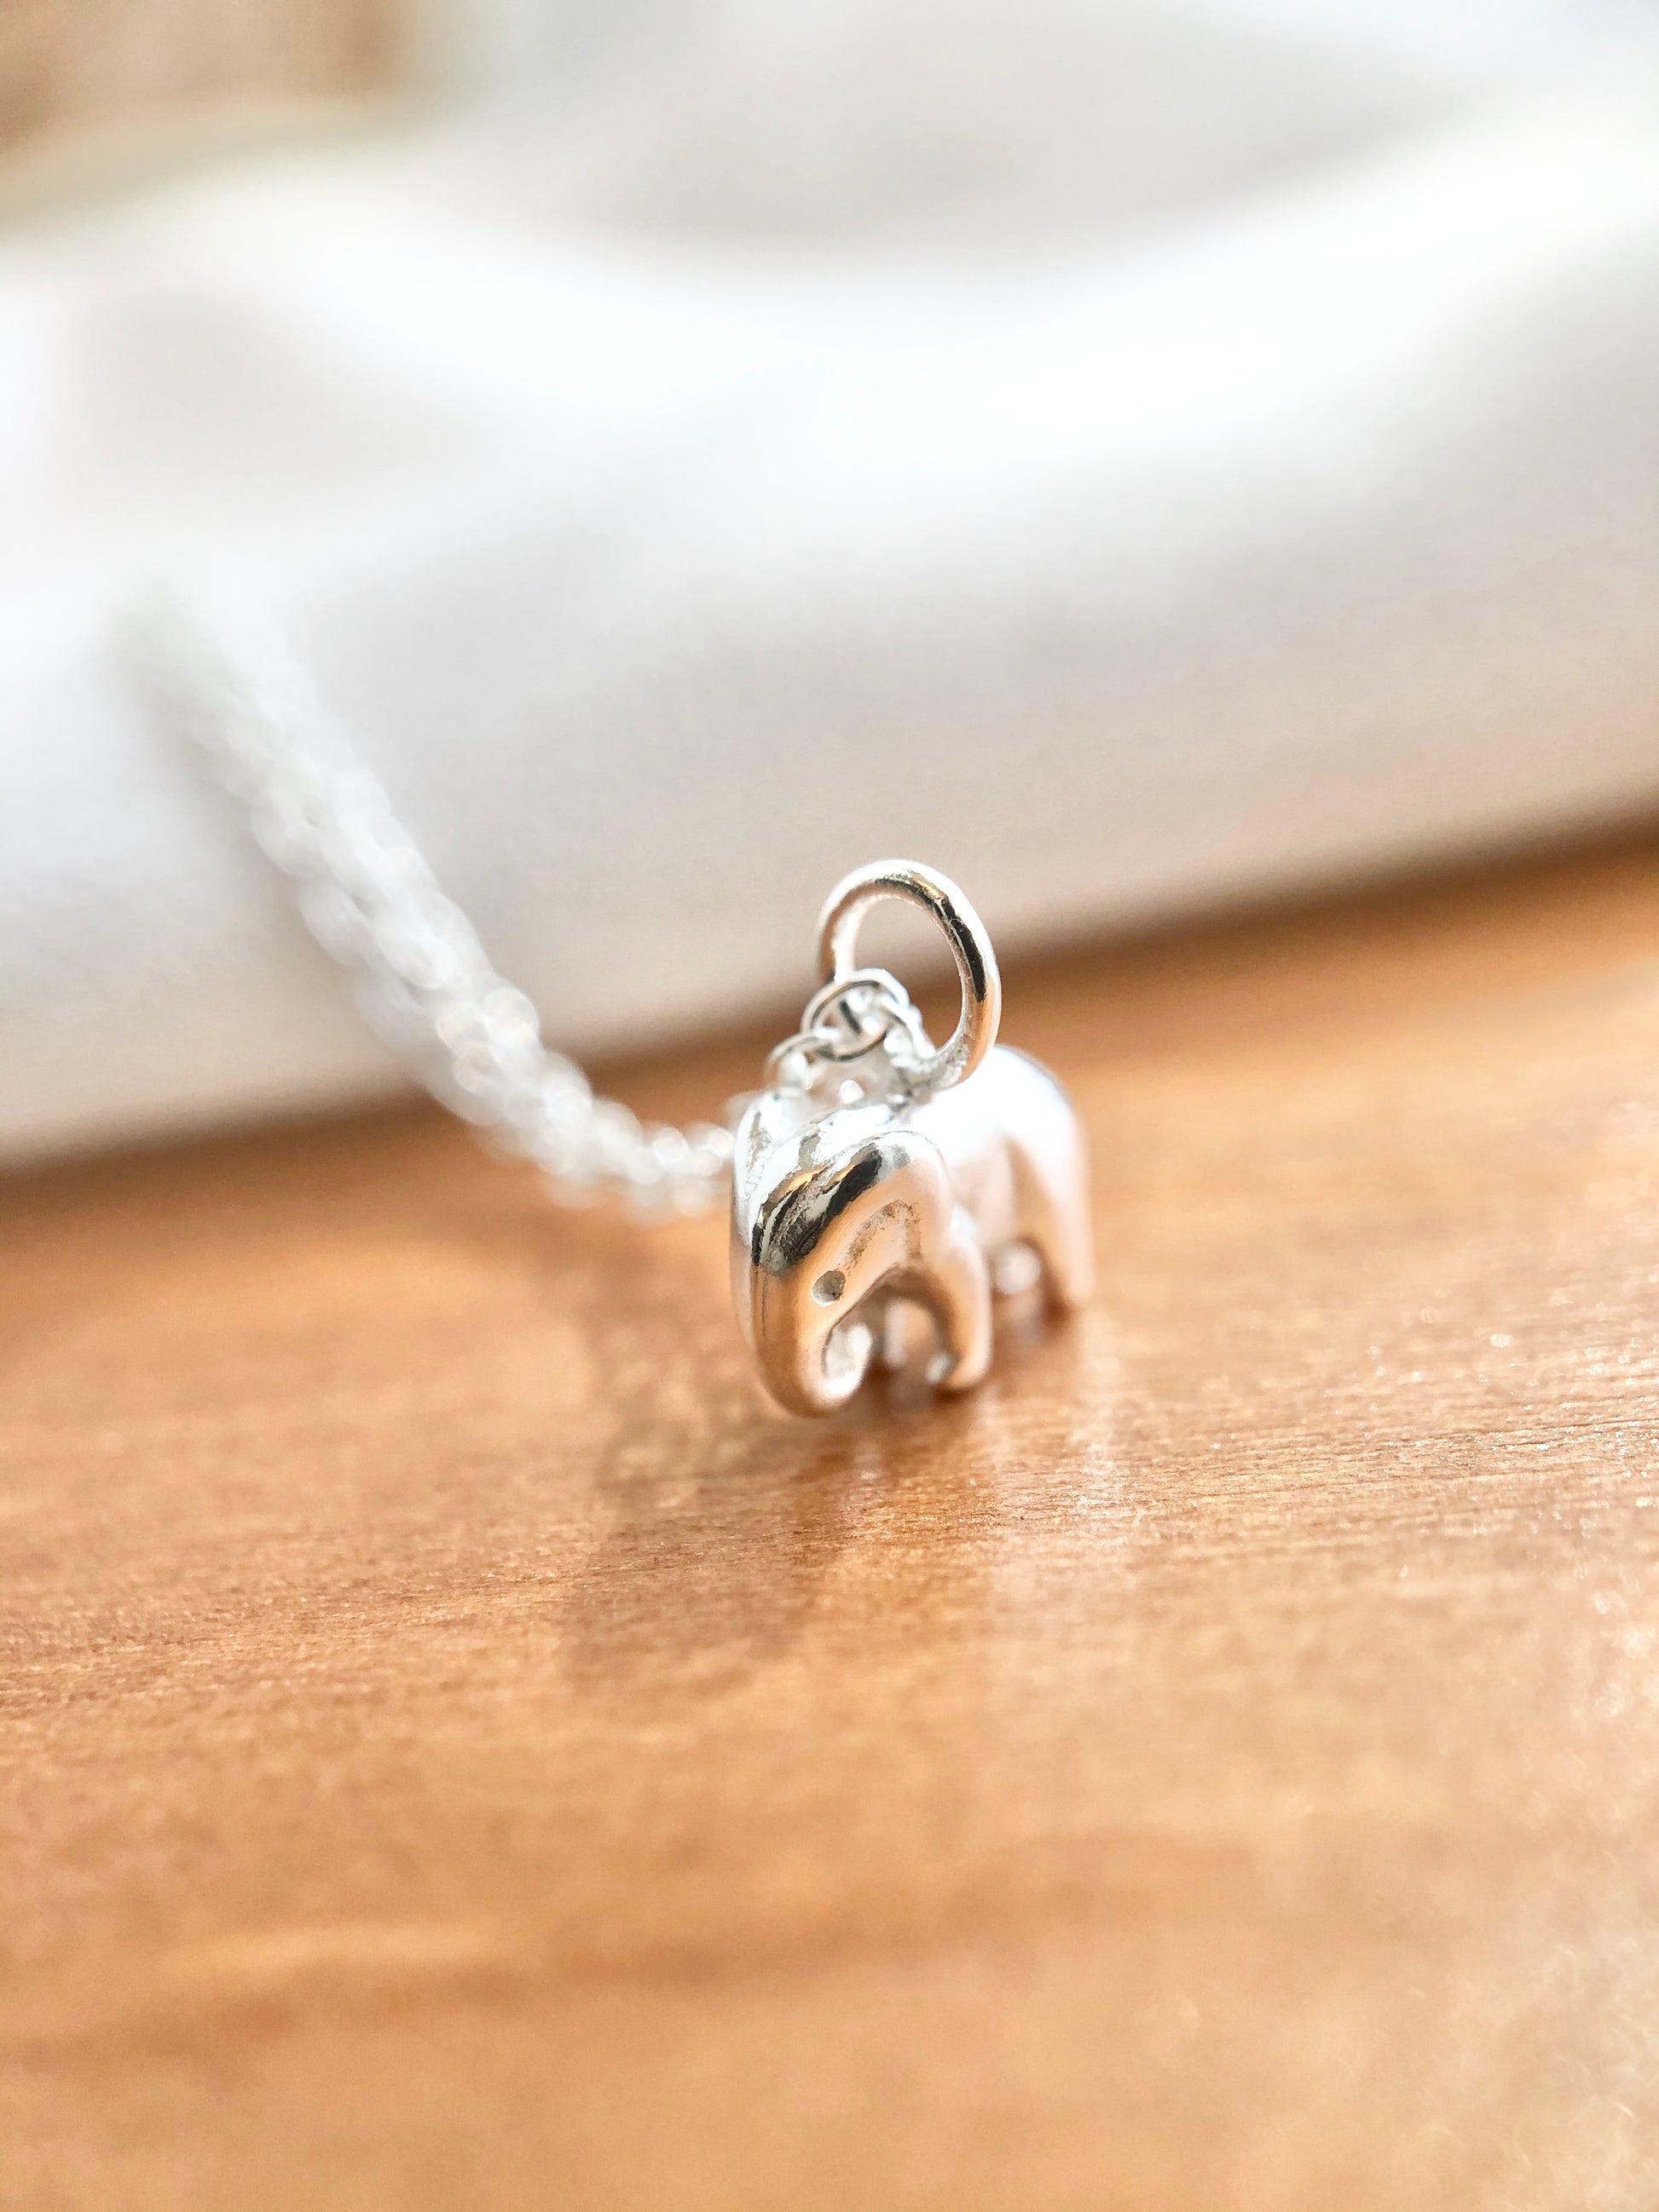 Elephant Necklace, Mini Elephant Necklace, Sisters Necklace, BFF Necklace, Best Friend Gift Jewelry, Elephant Lover, Animal Necklace